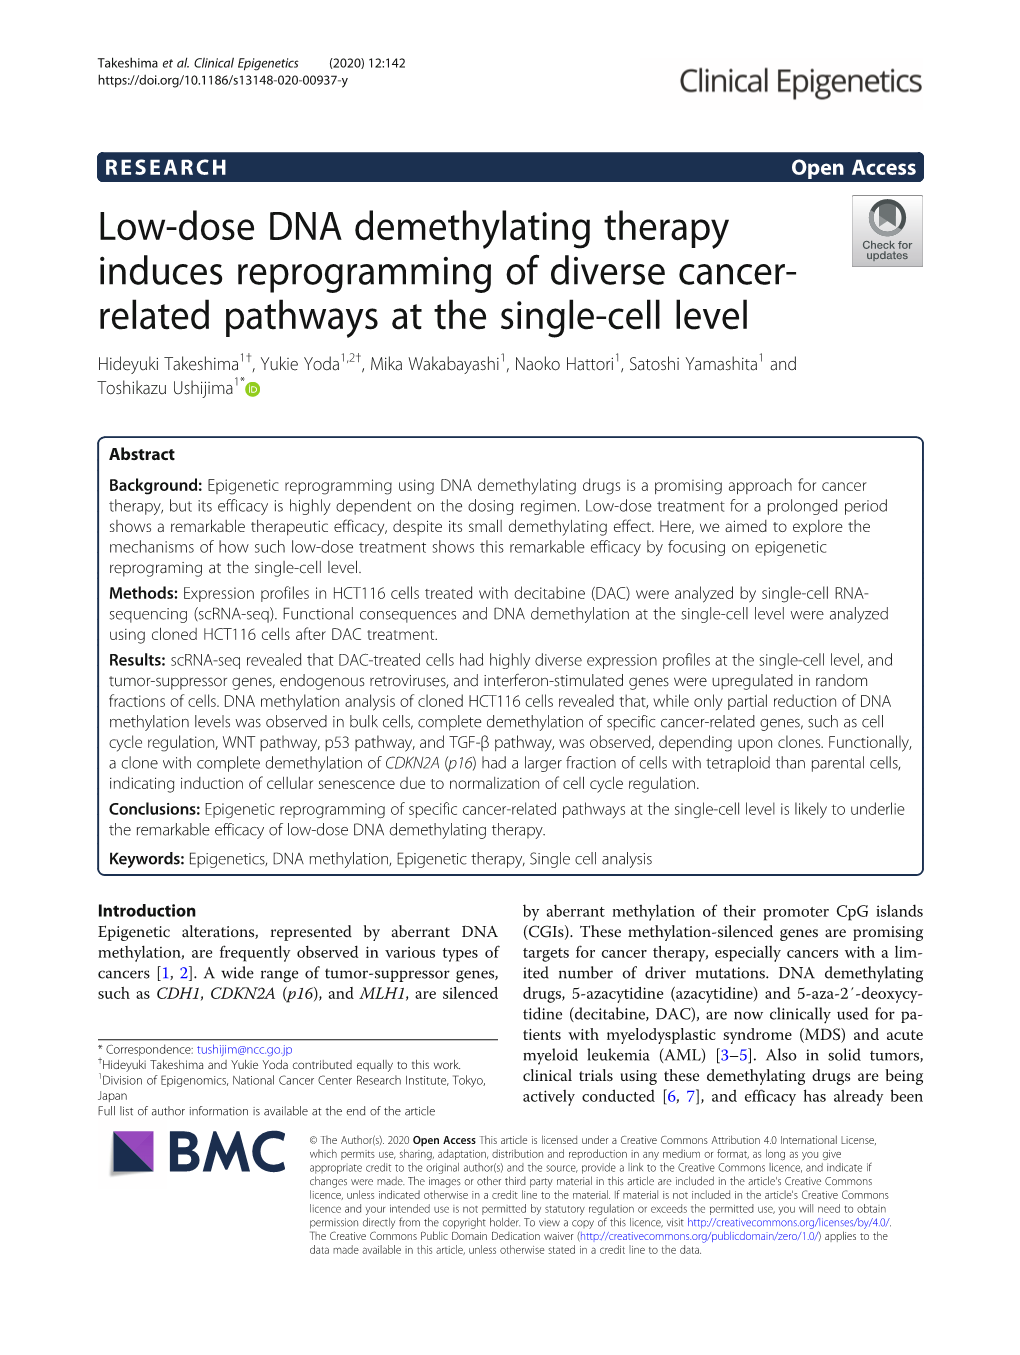 Low-Dose DNA Demethylating Therapy Induces Reprogramming of Diverse